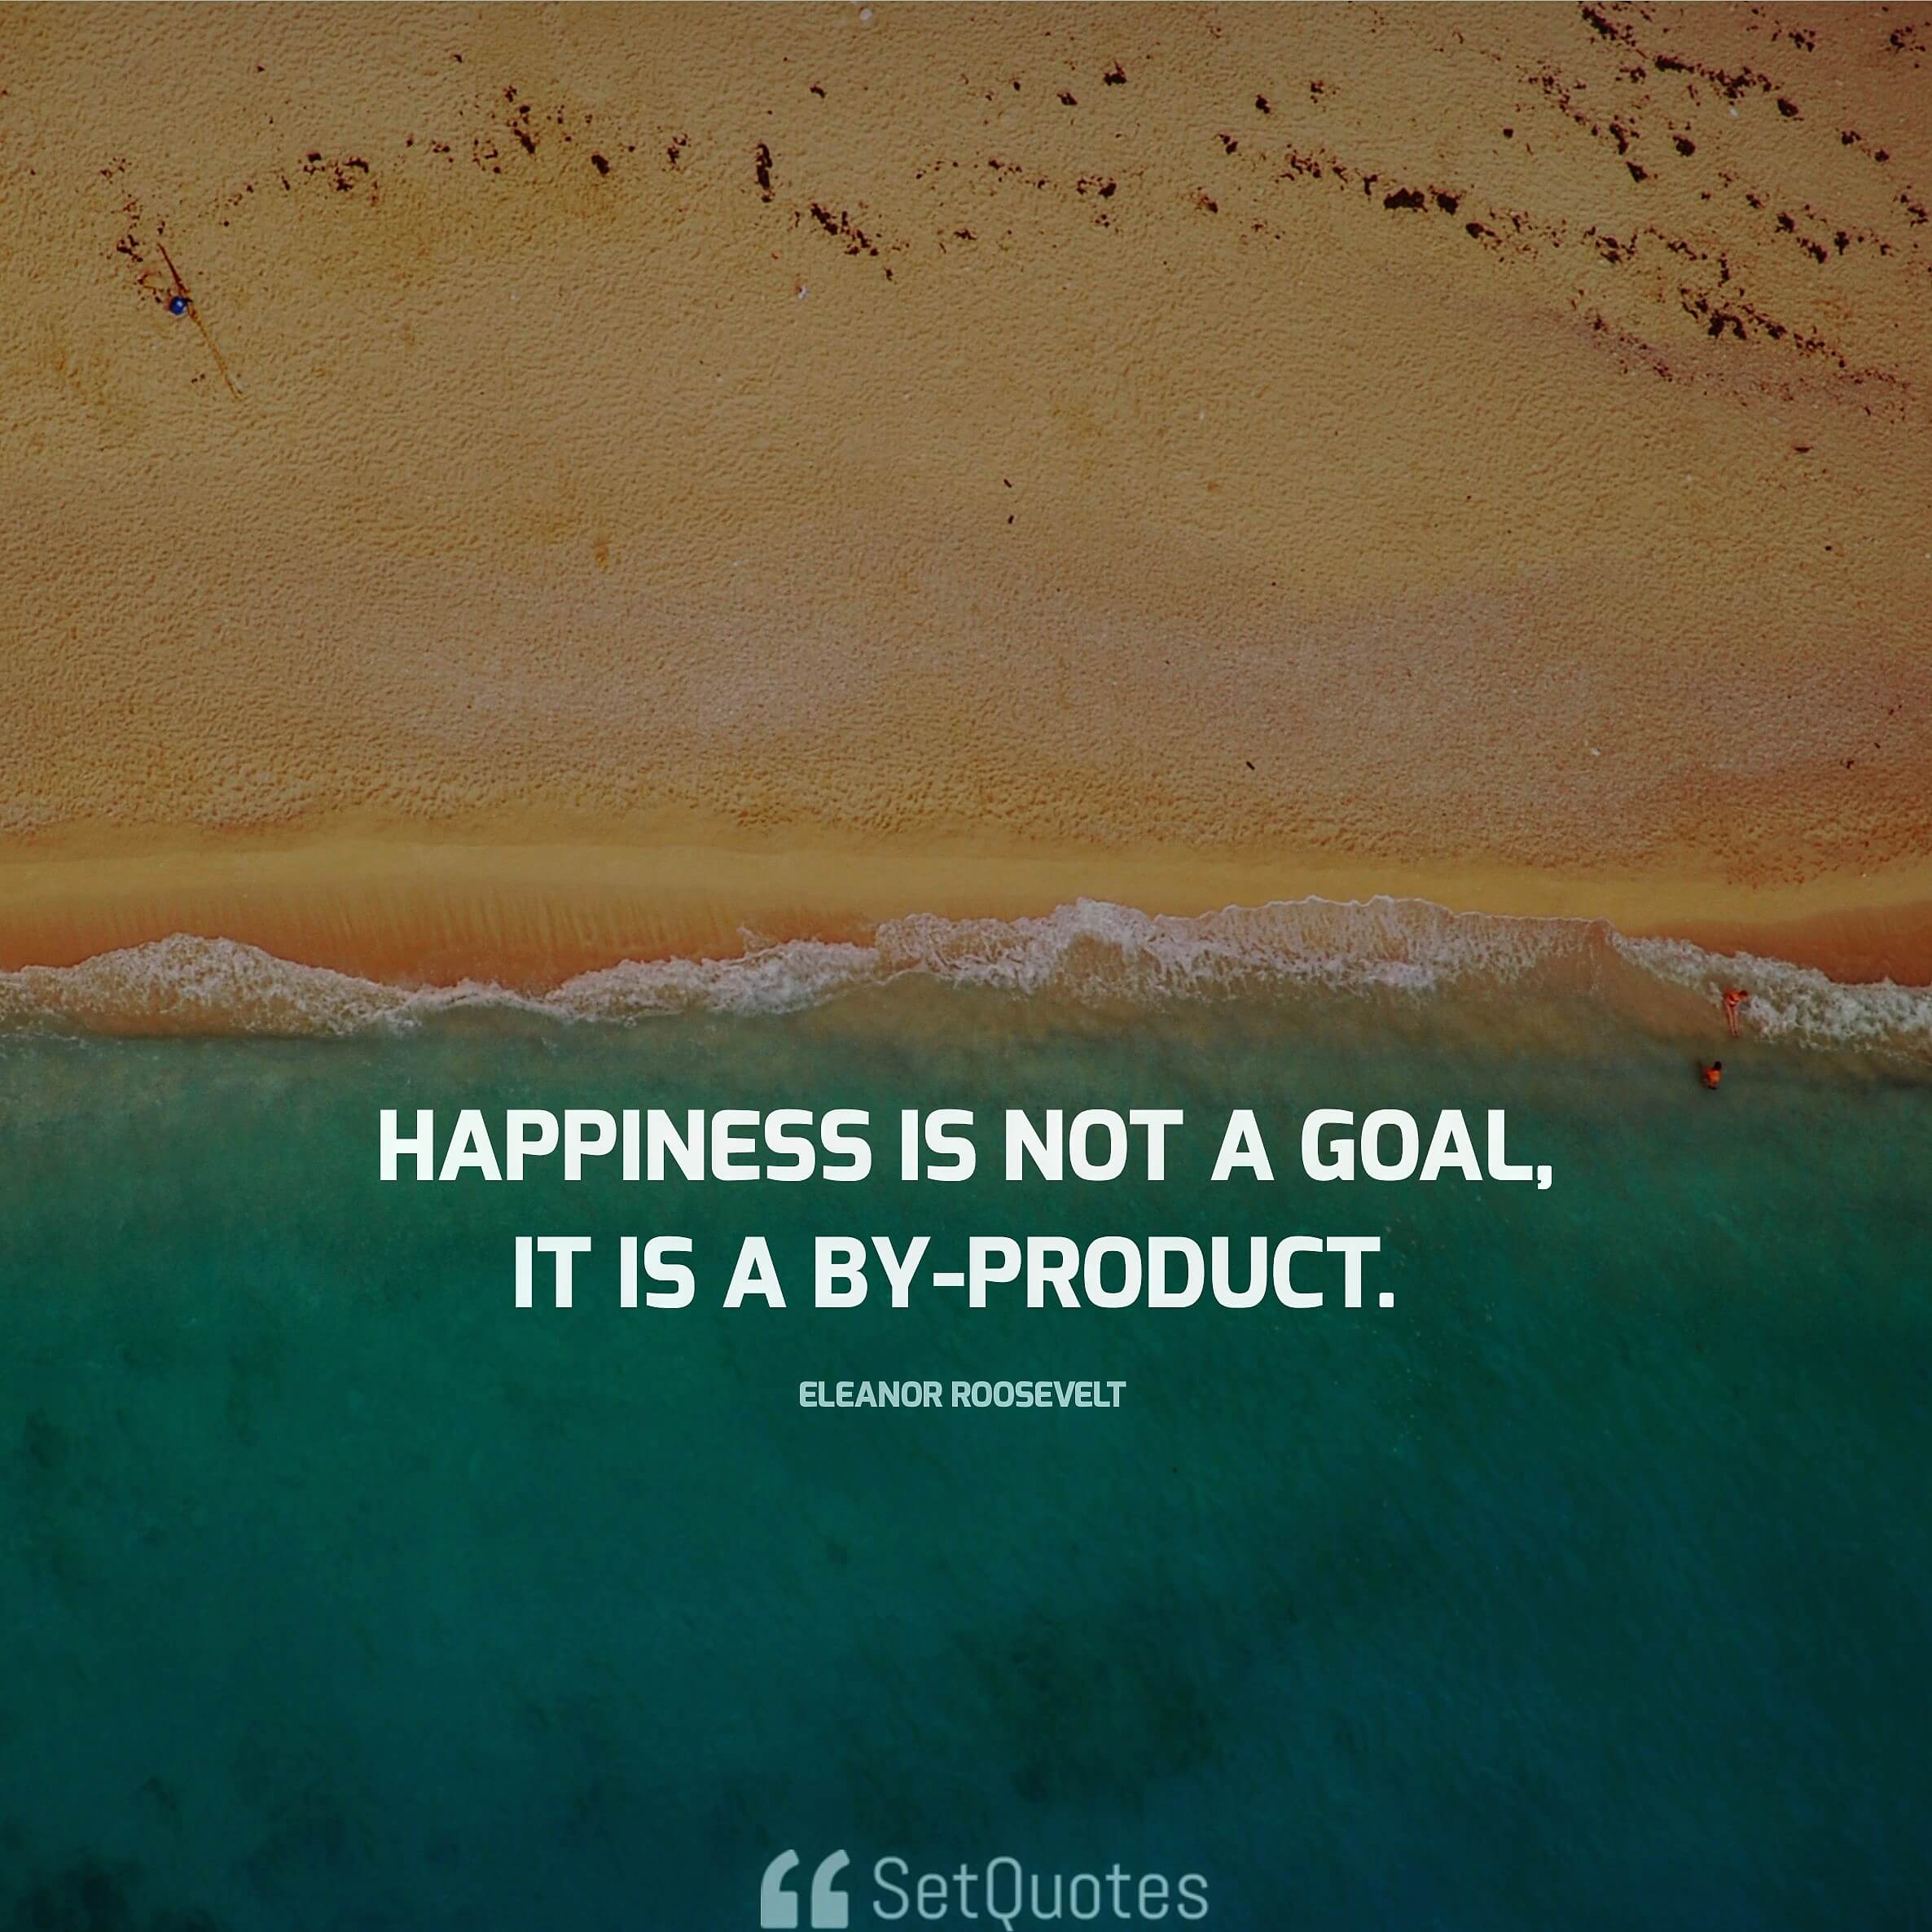 "Happiness is not a goal; it is a by-product." - Eleanor Roosevelt